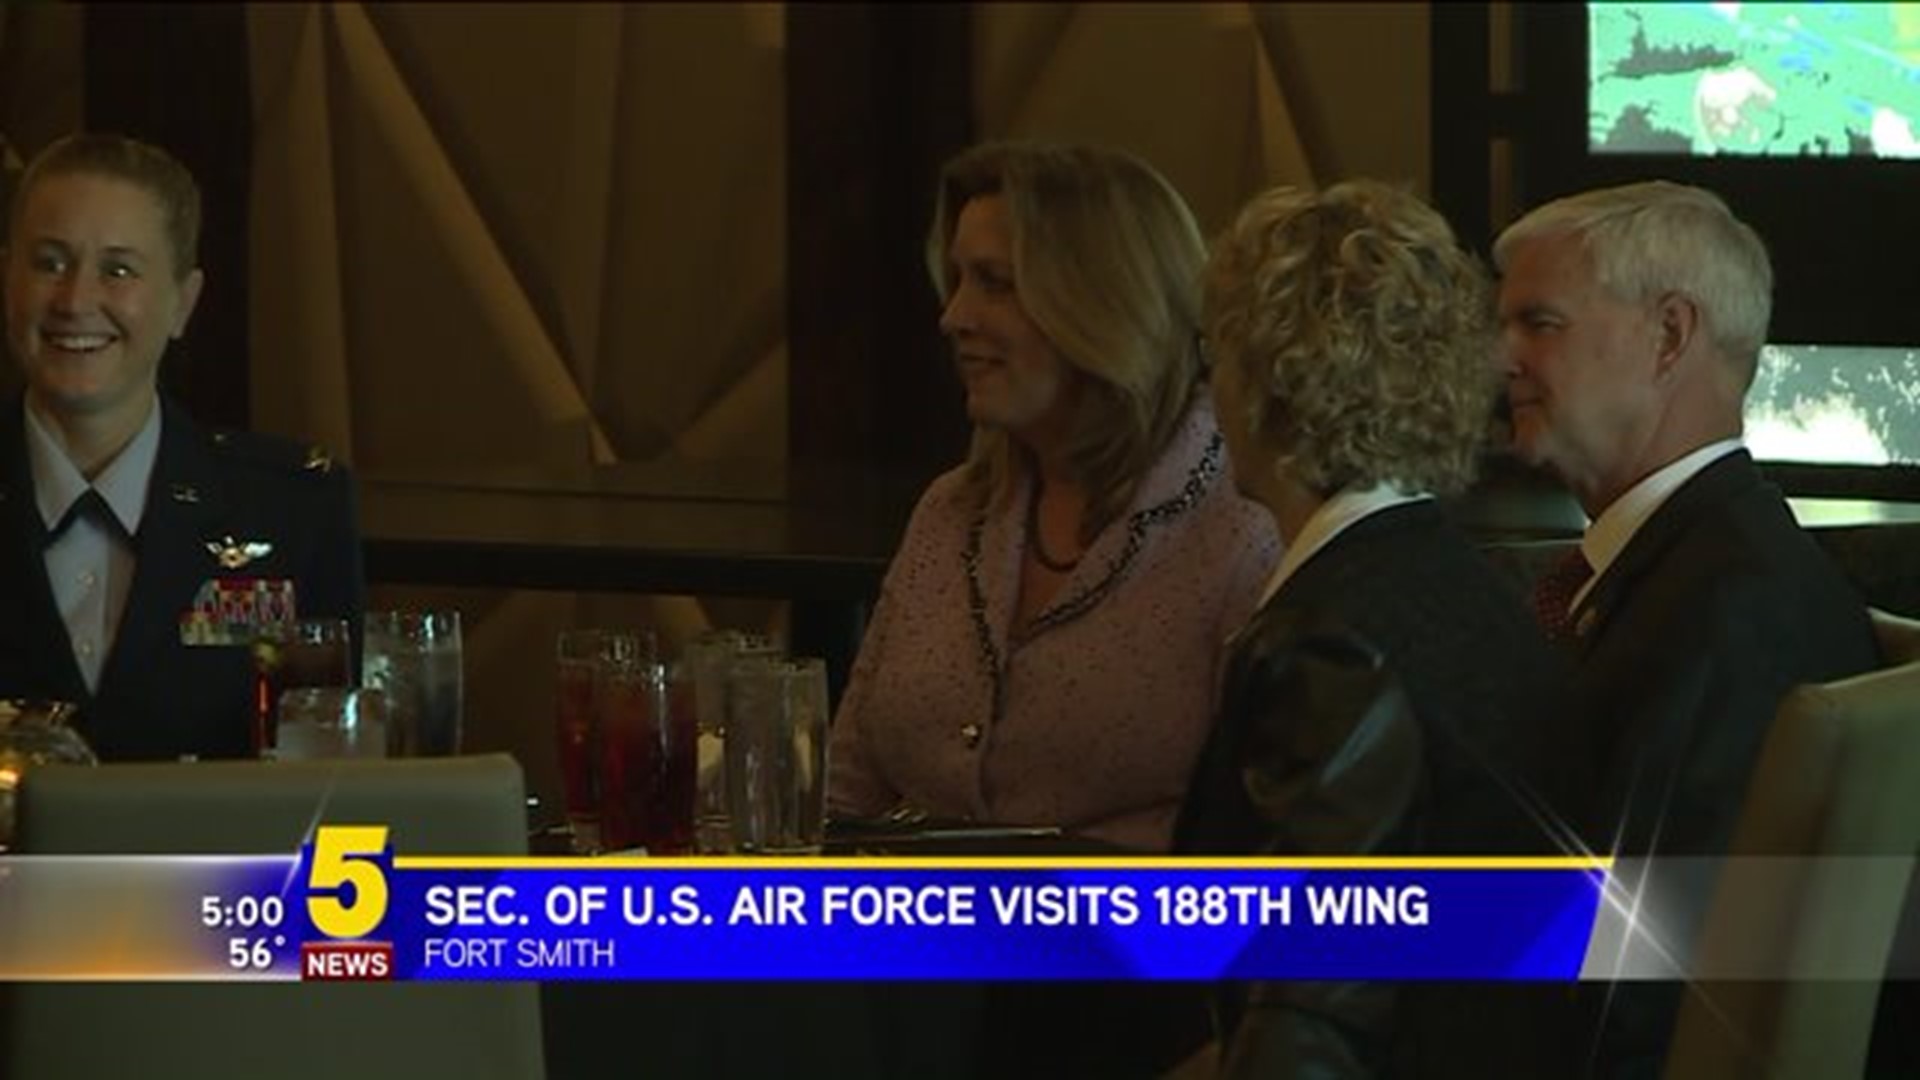 Secretary of U.S. Airforce visits Fort Smith